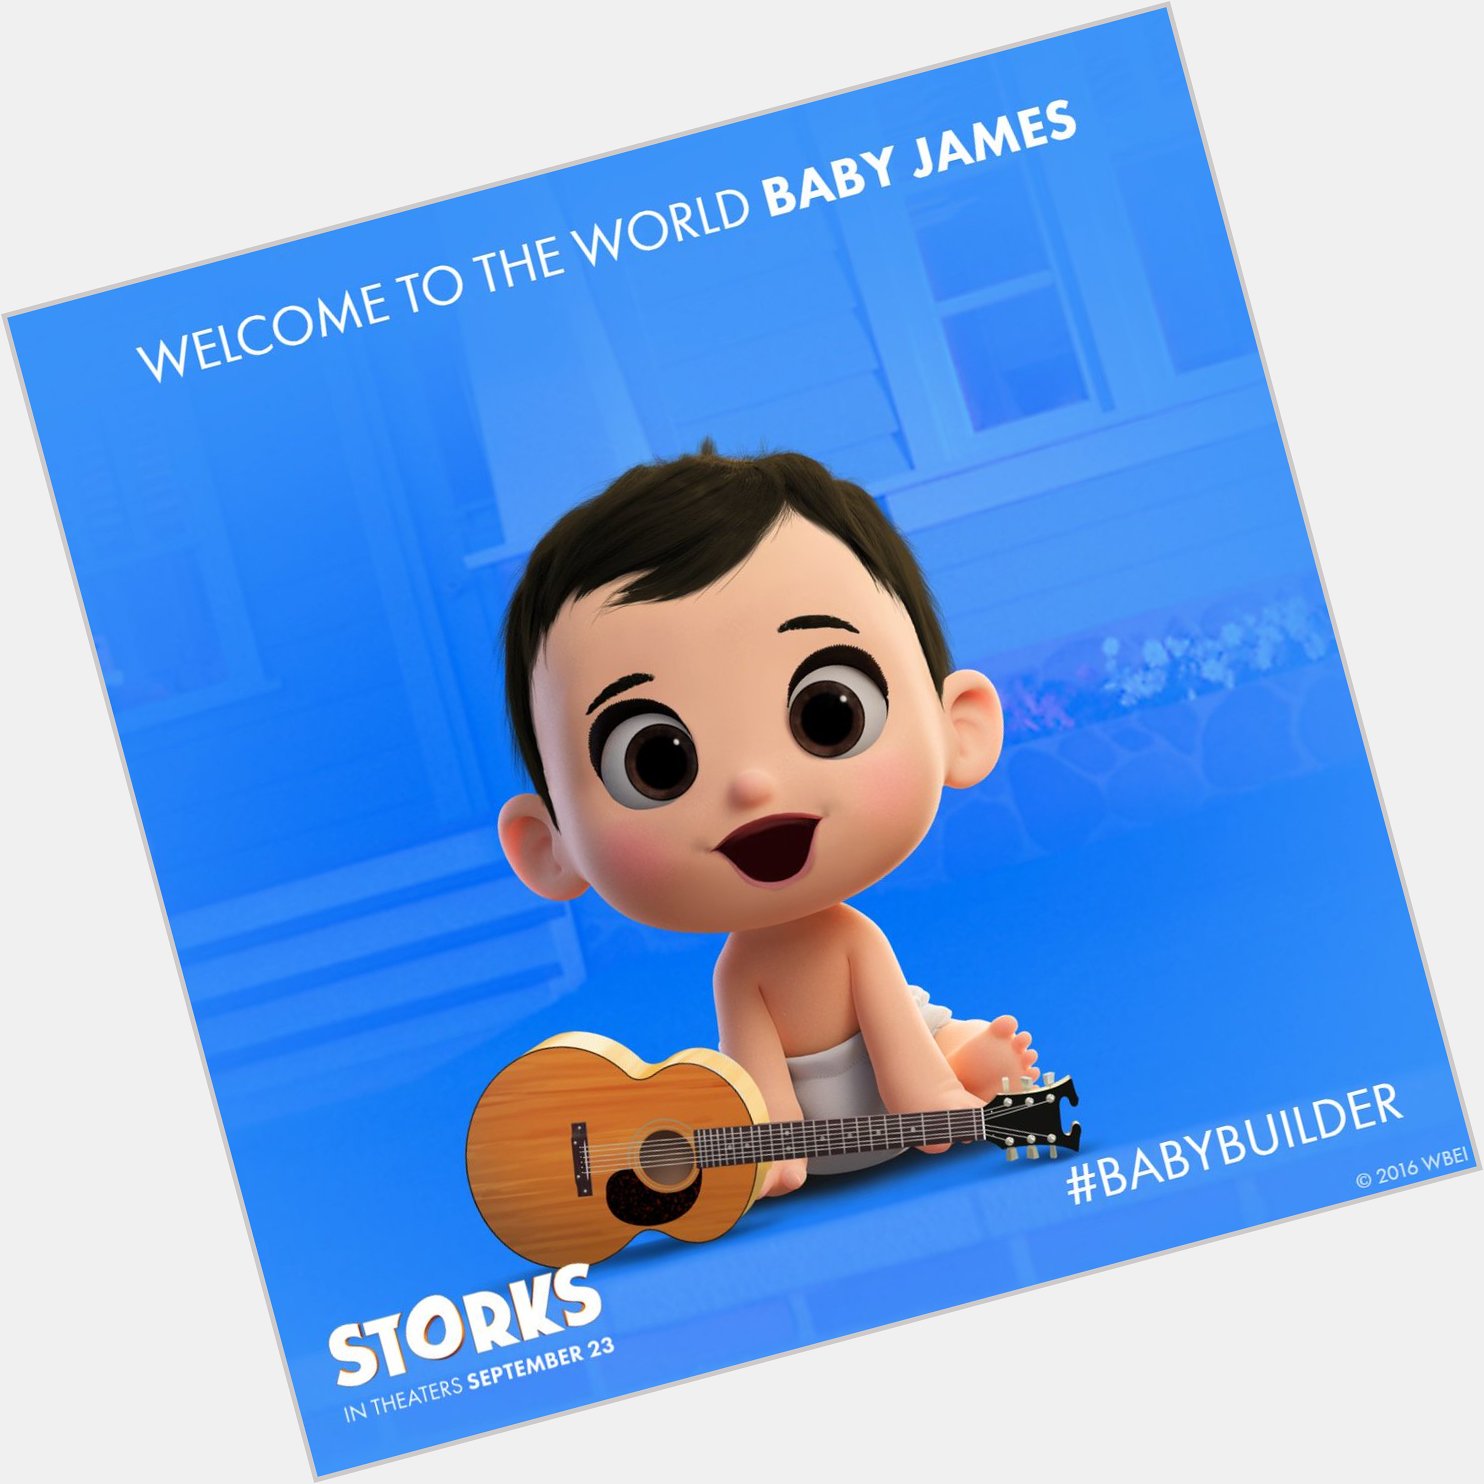 Happy Birthday to . James Dean Bradfield, who, I maintain, had to be an adorable baby.
To whit: 